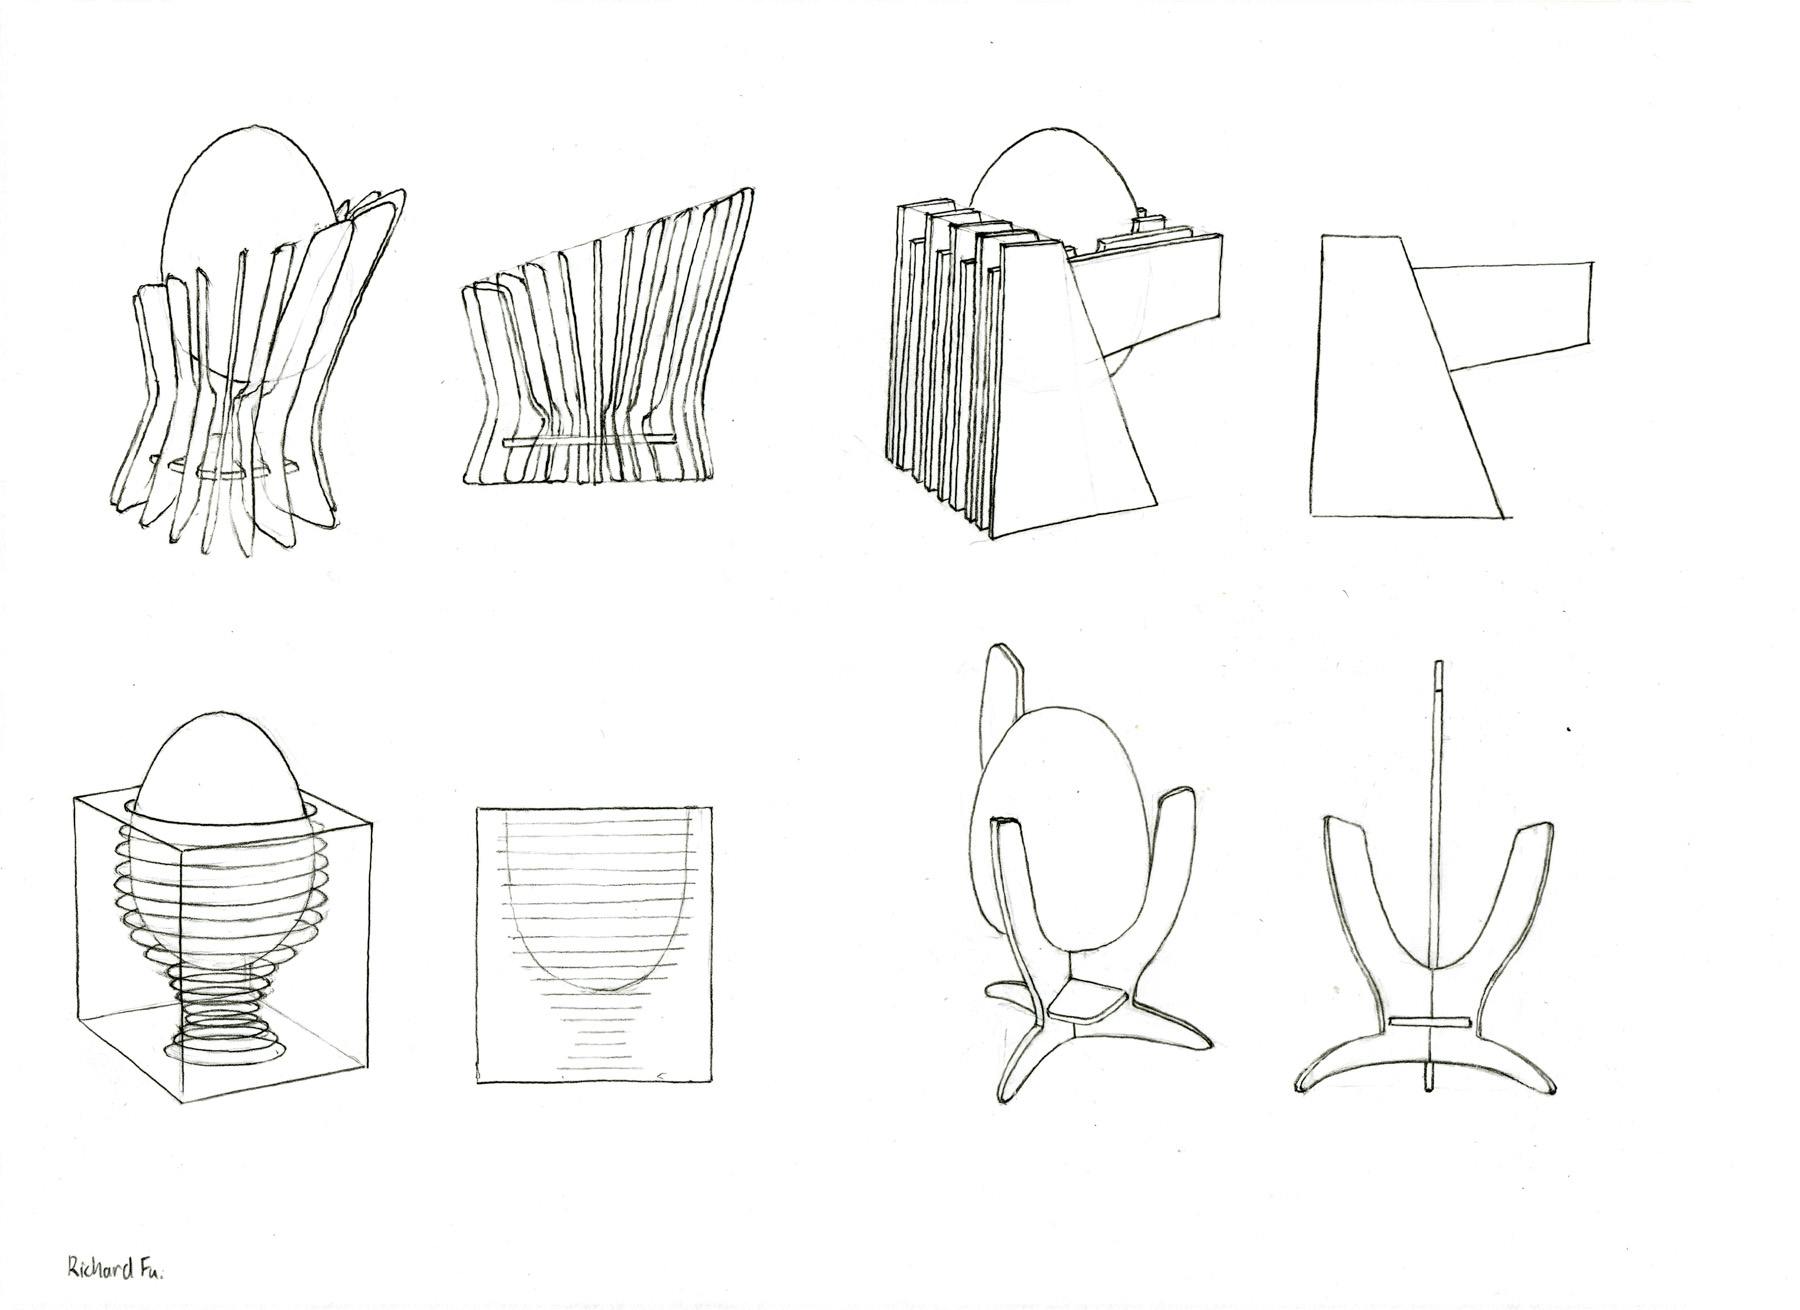 Concept sketches of EggHolders 1 through 4. One is a fin loft cylinder; two consists of a fin loft trapezoid cantilevered on top of another; three is a glass cube made of stacked sheets with engravings; four is a tripod that matches the curvature of the egg. 